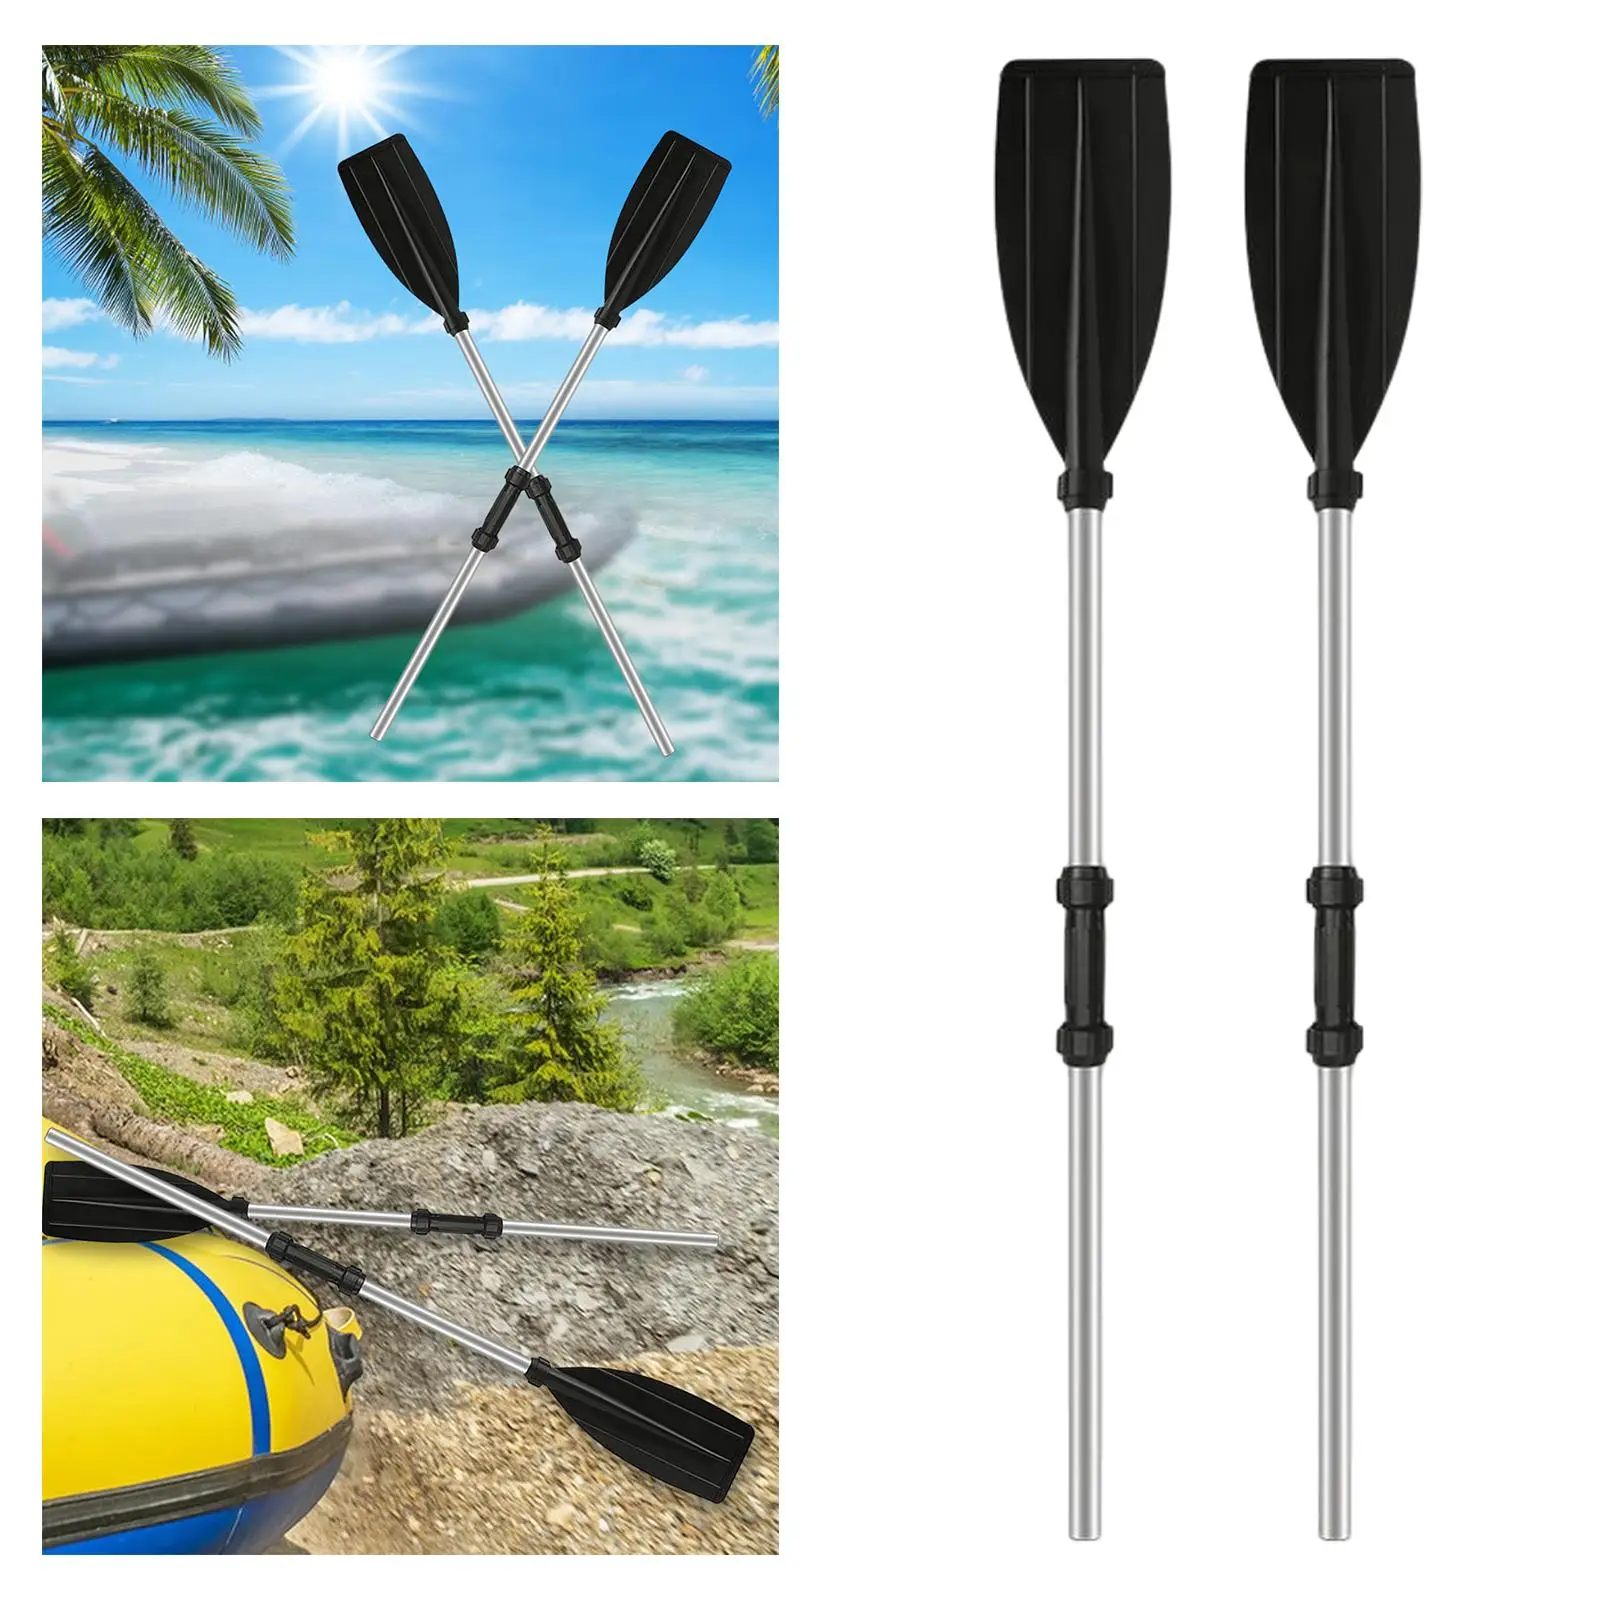 Multipurpose Kayak Boat Rafting Paddle Aluminium Alloy Detachable Accessories Stand up Paddle Board for Rafting Outdoor Sports